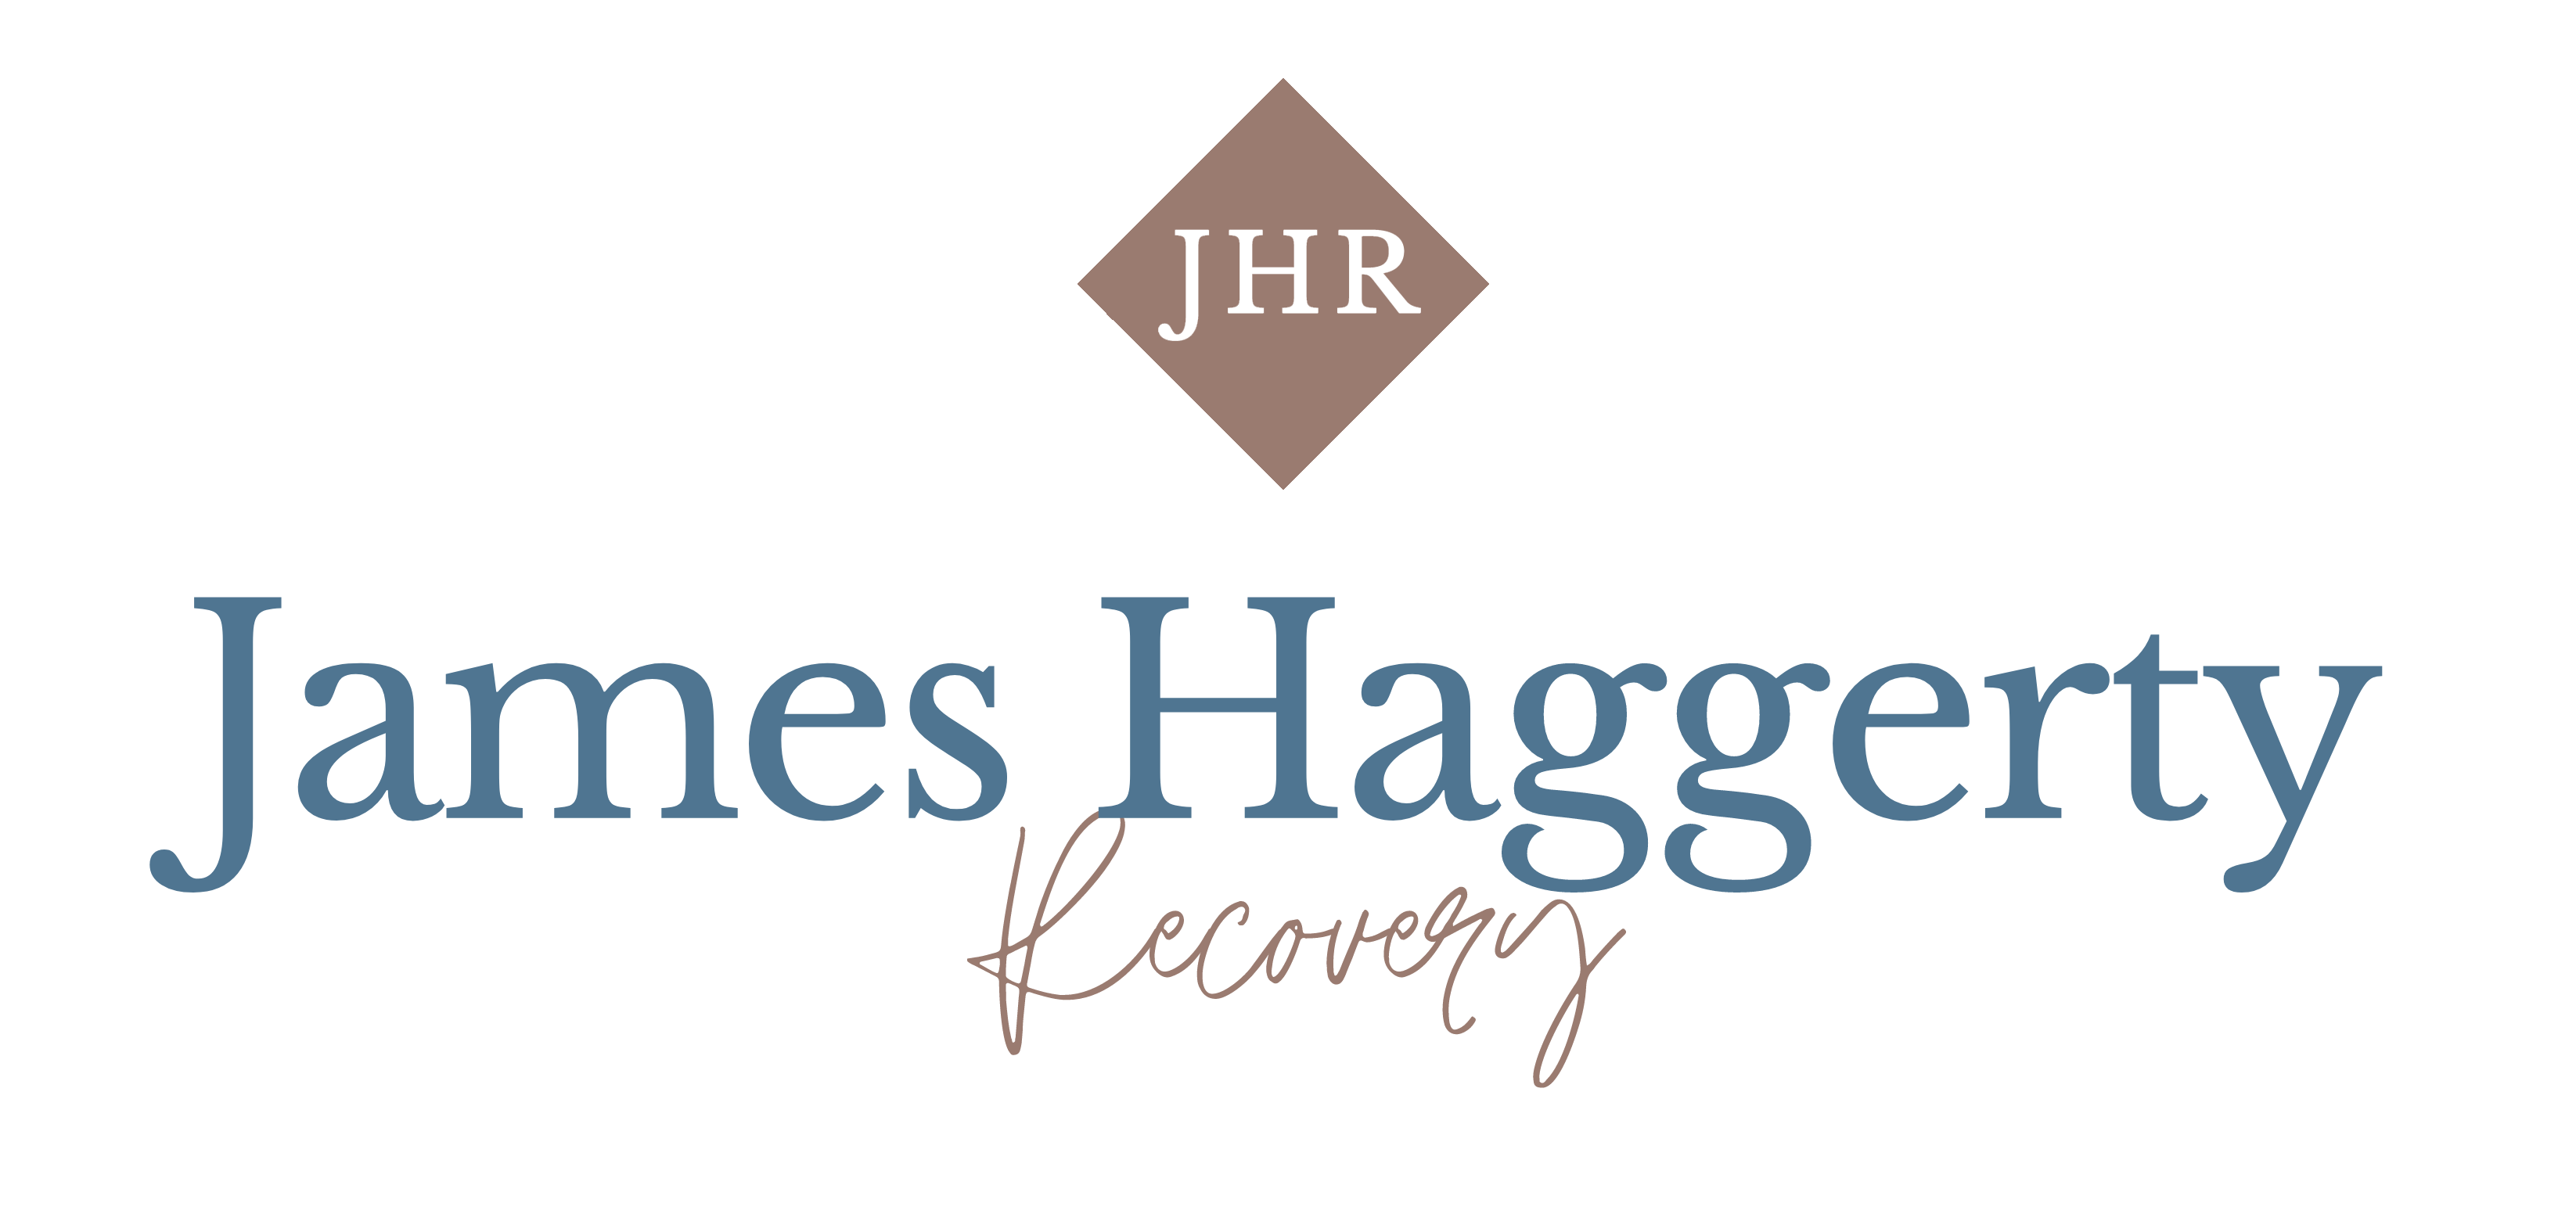 James Haggerty Recovery